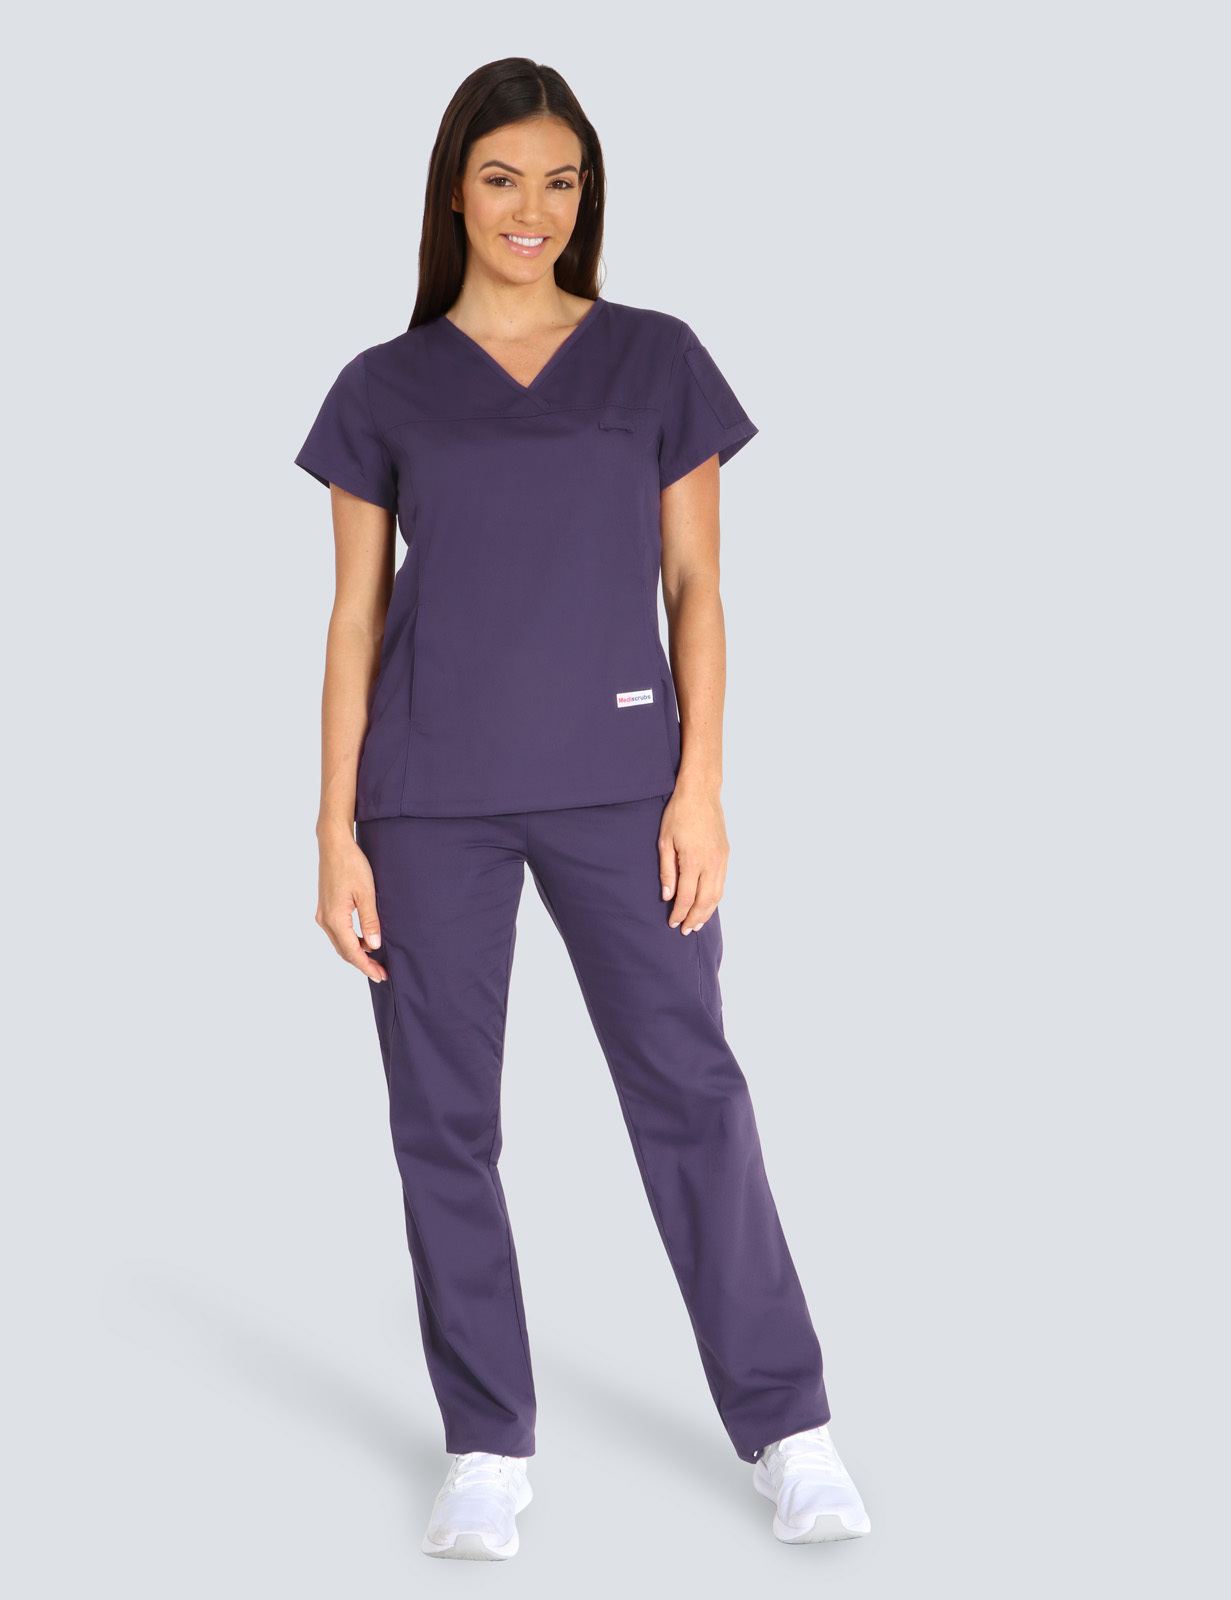 Caboolture Hospital - ED CN (Women's Fit Solid Scrub Top and Cargo Pants in Aubergine incl Logos)